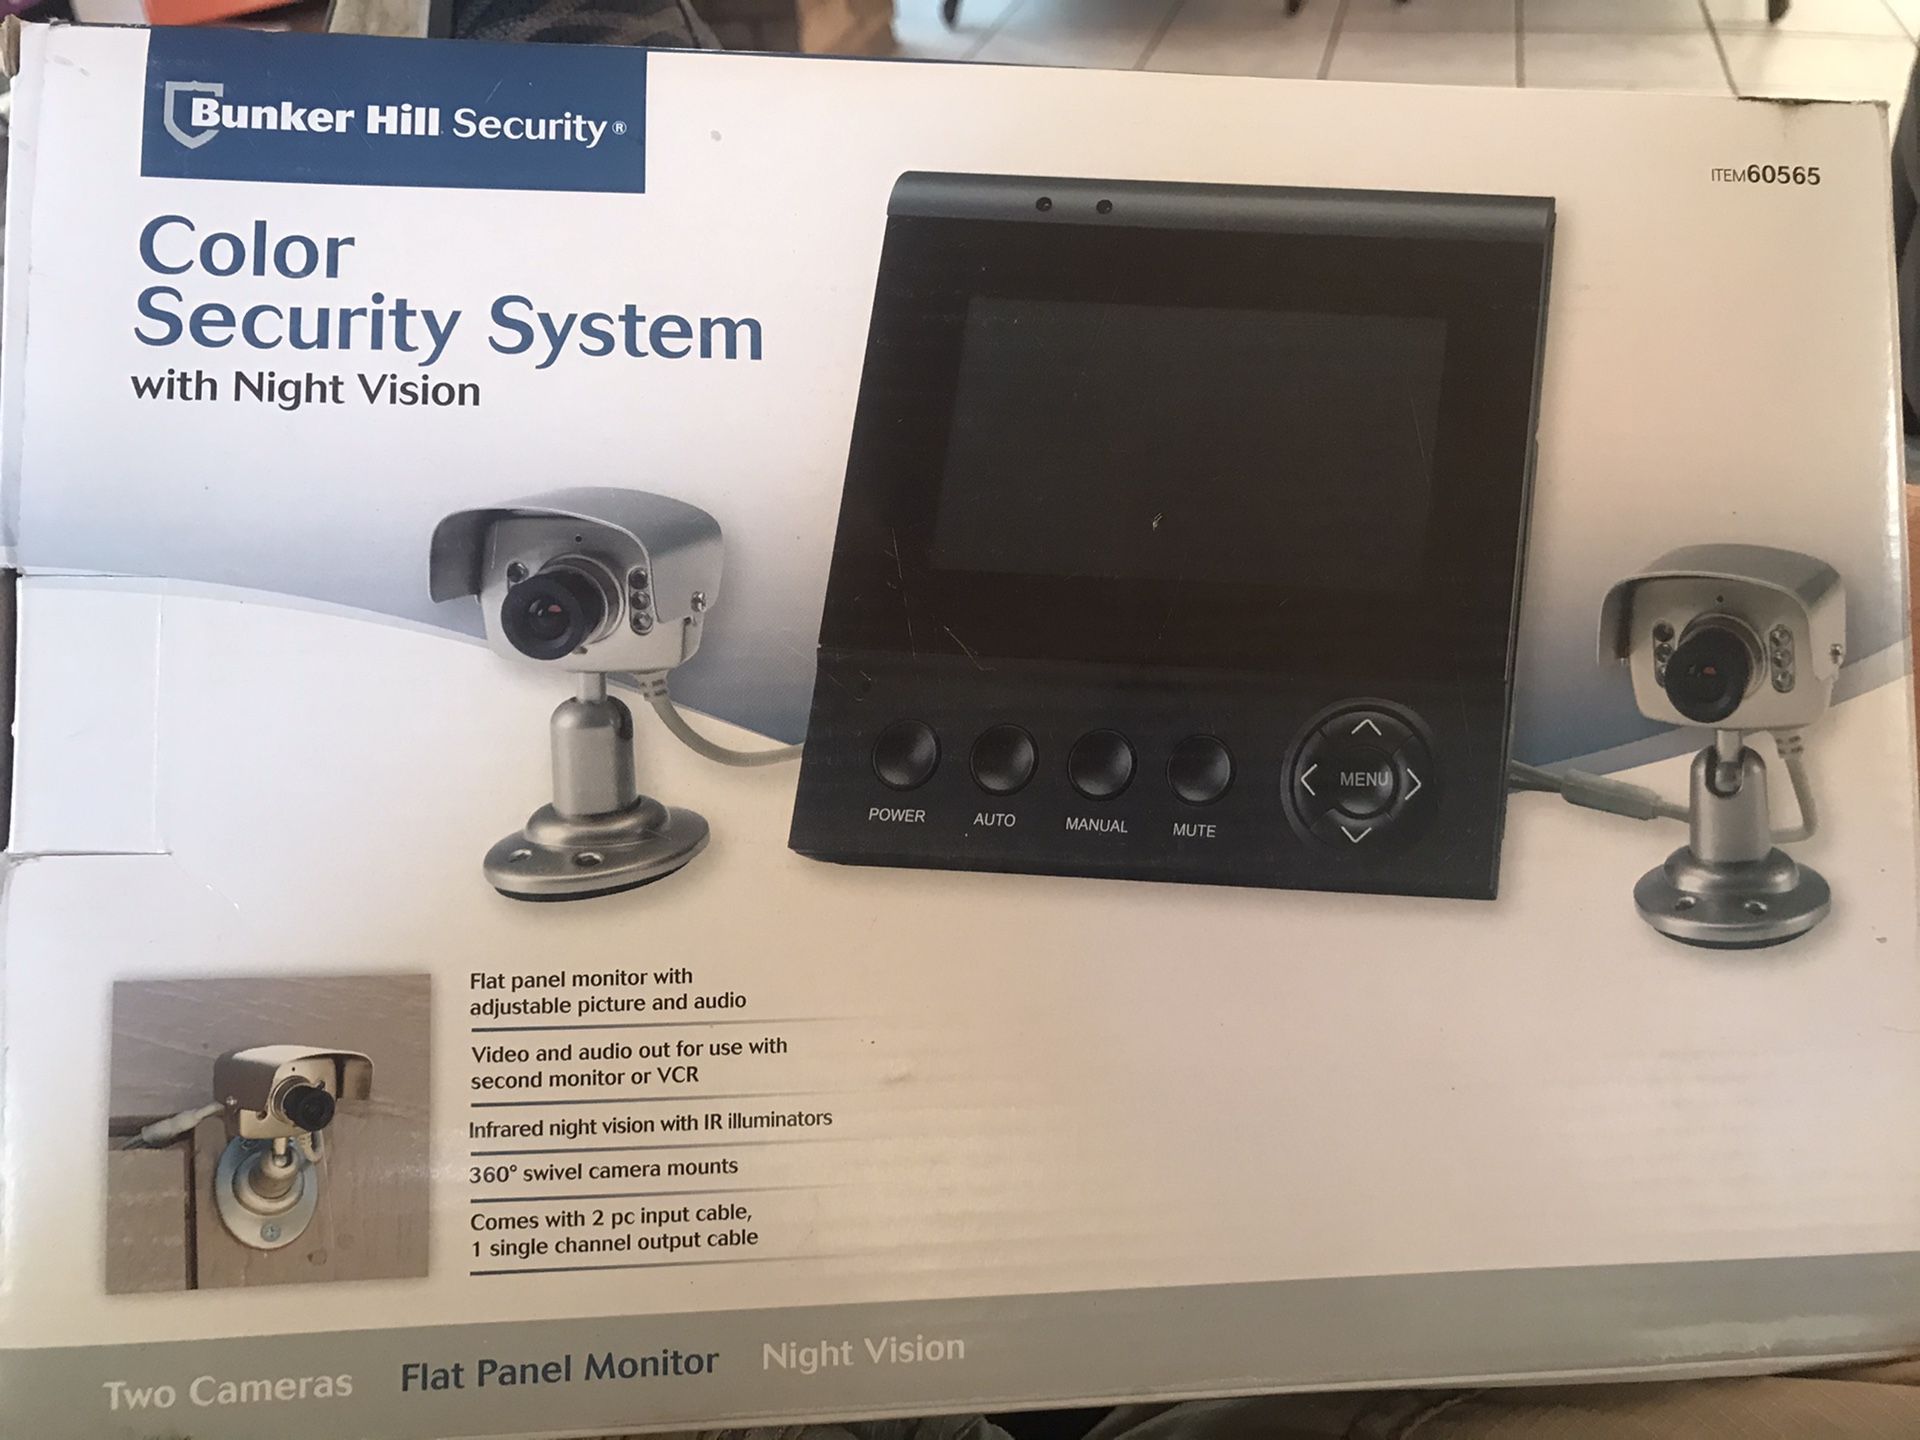 Security camera and flat panel monitor